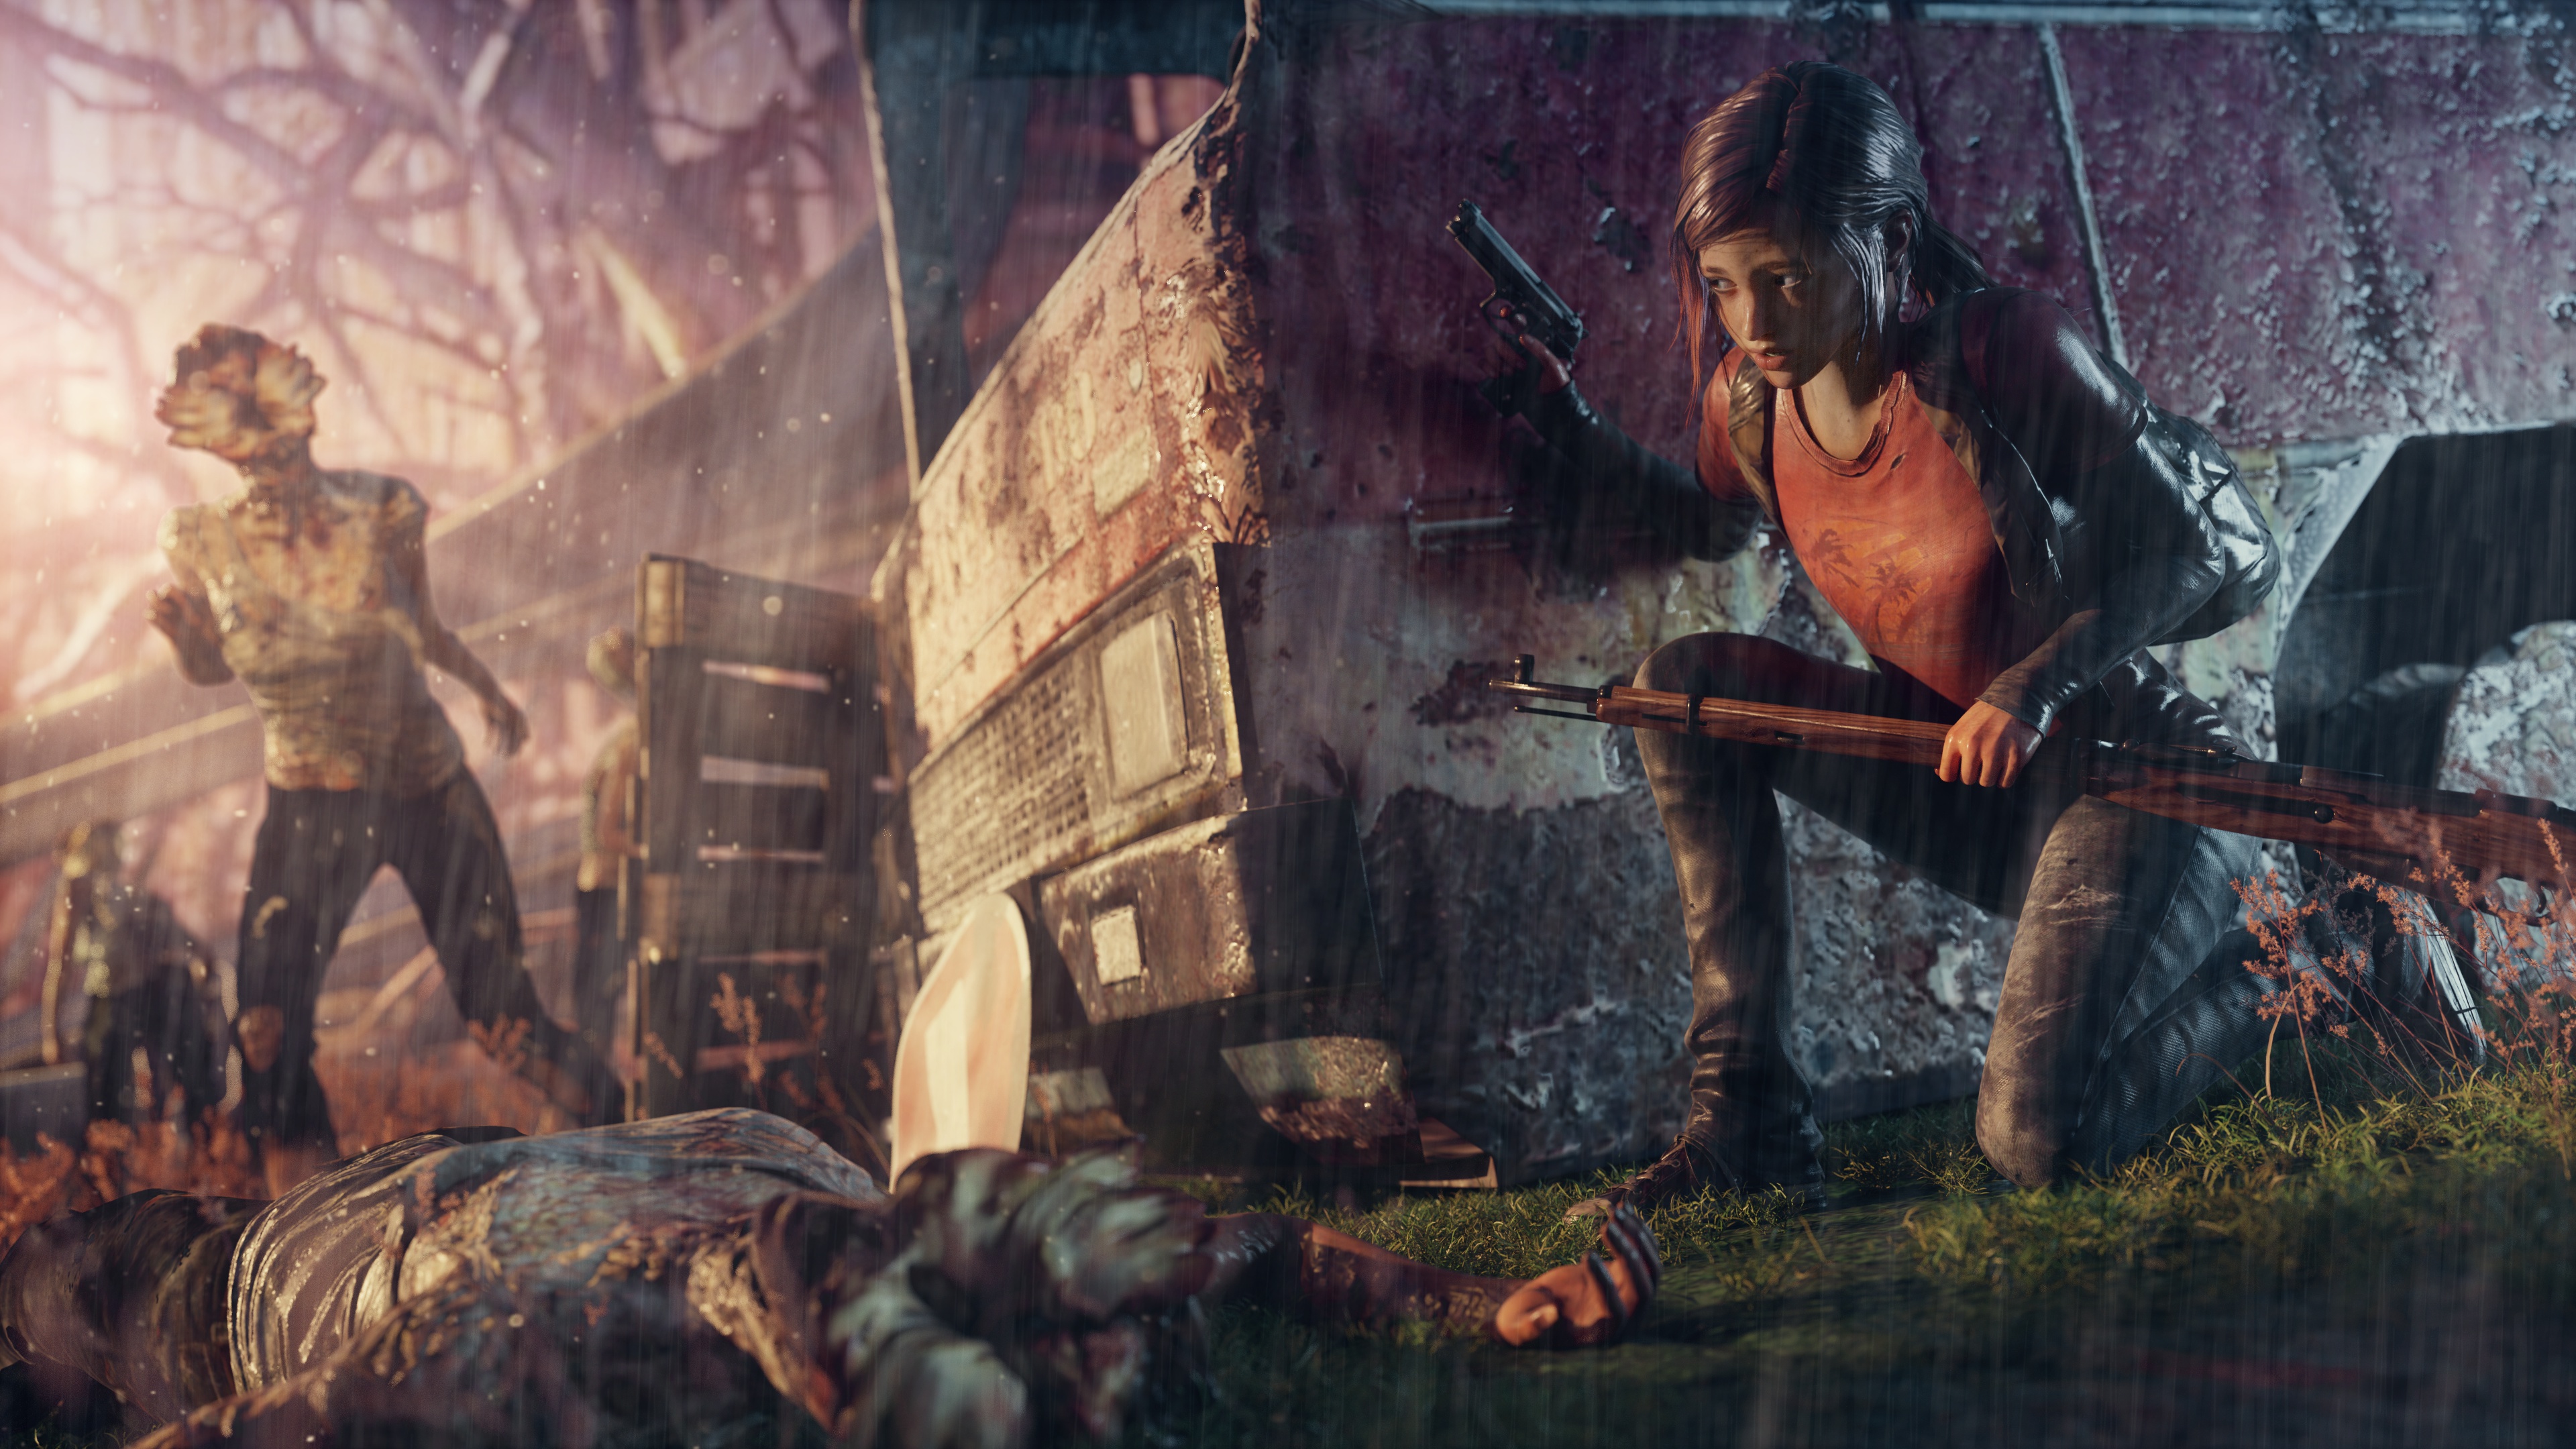 Video Game The Last Of Us 4k Ultra HD Wallpaper